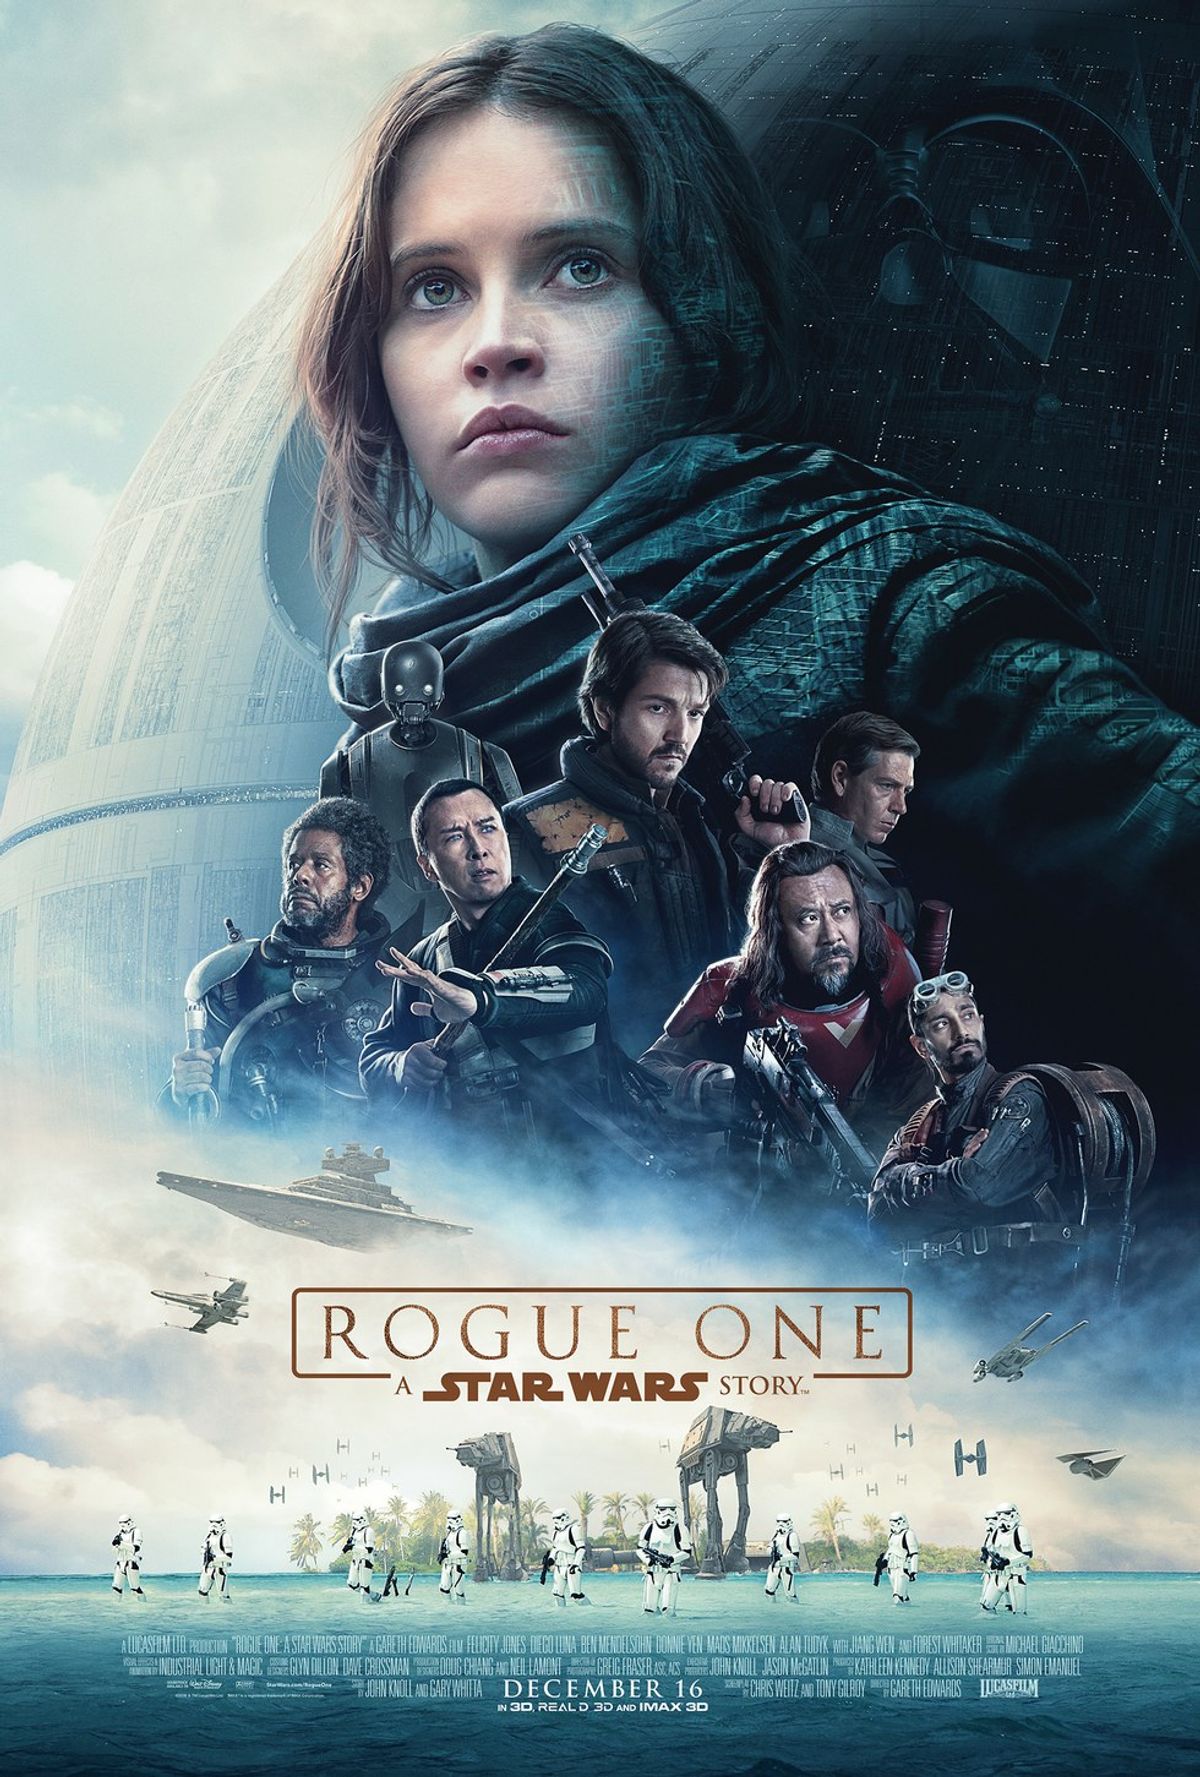 Waiting for 'Rogue One': Thinking About The Prequels, Sequels, and Spin-Offs